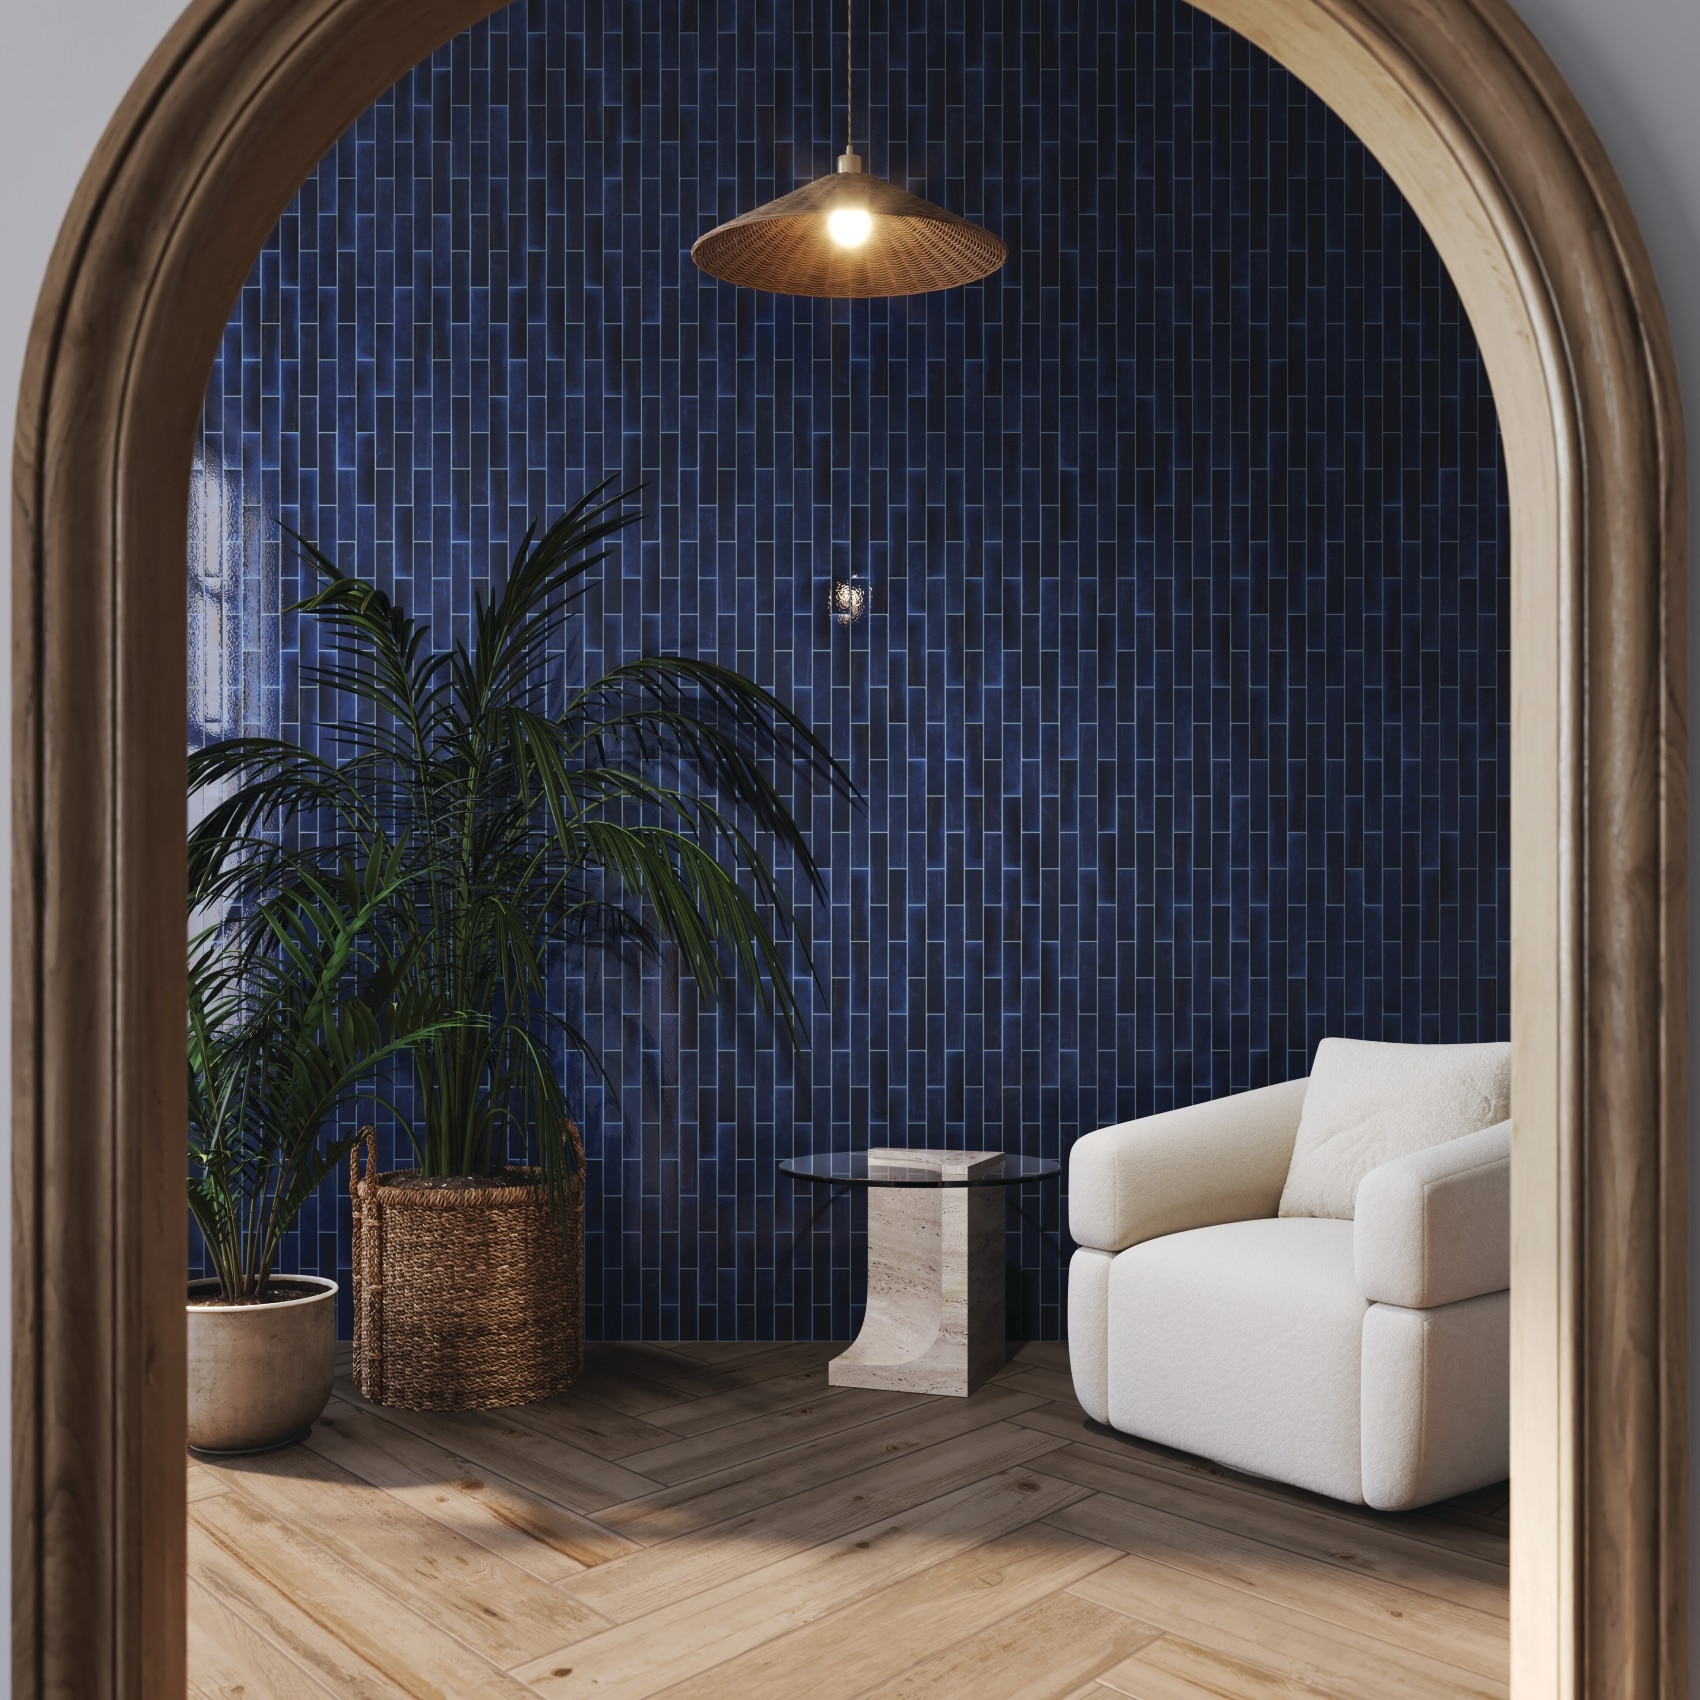 Lounge seating area with an arched entry door and a blue tiled wall.